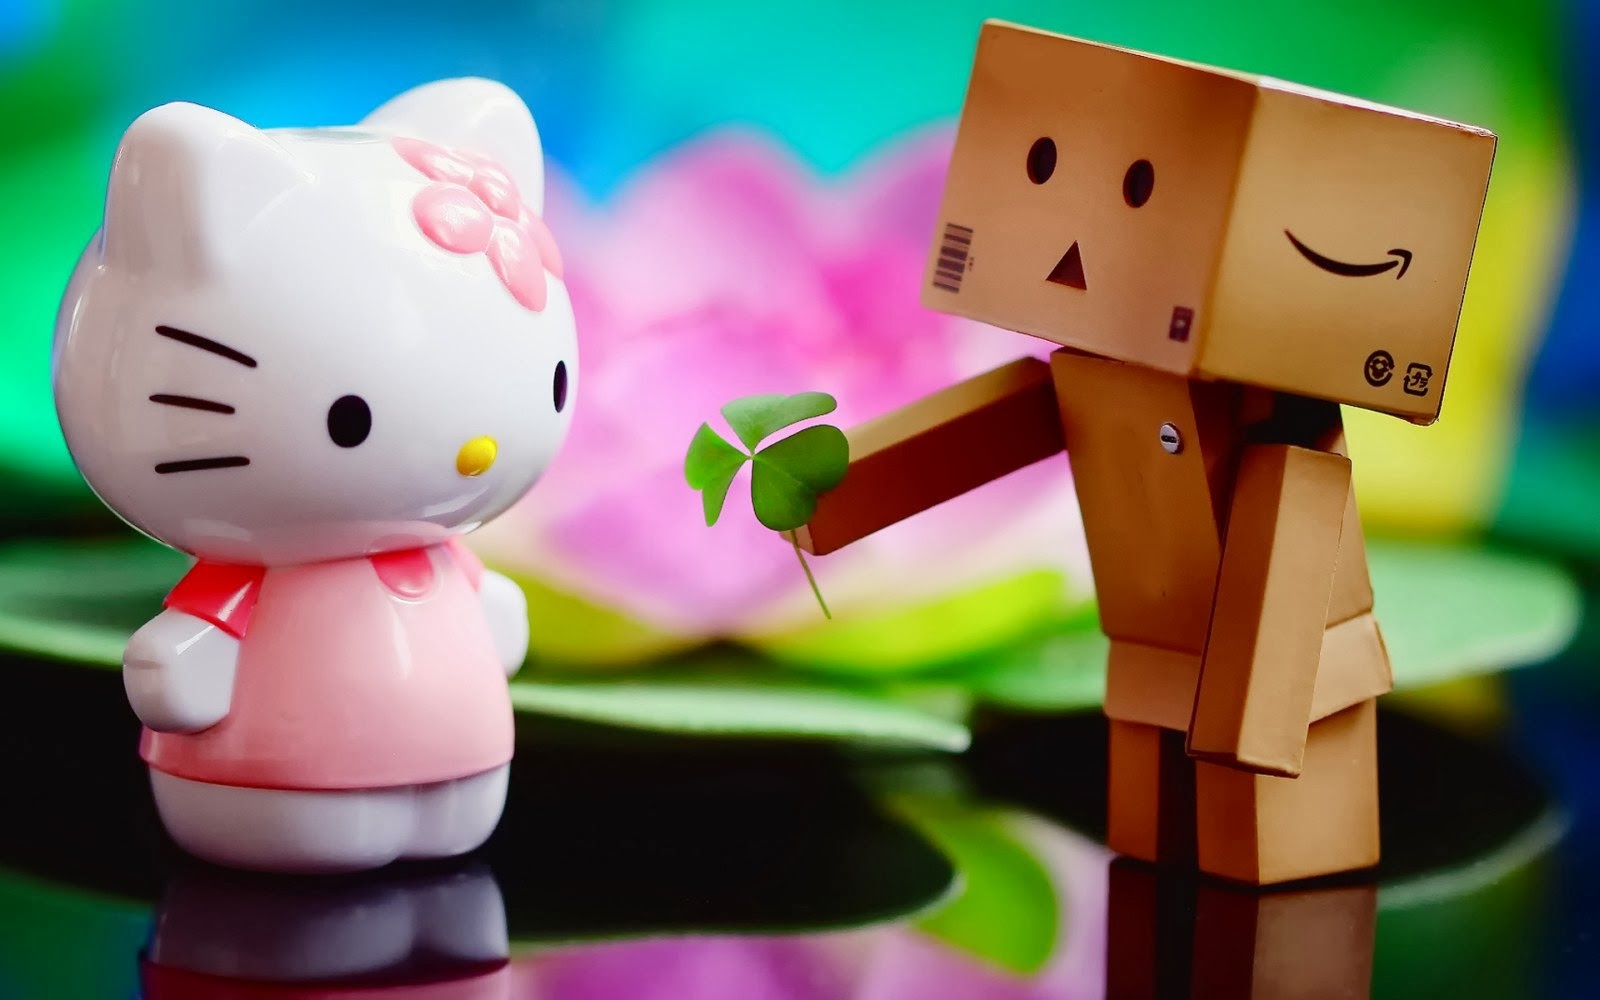 Best Happy Propose Day 2015 Gif Images 3D Wallpapers Greeting Cards for Girlfriend & Boyfriend